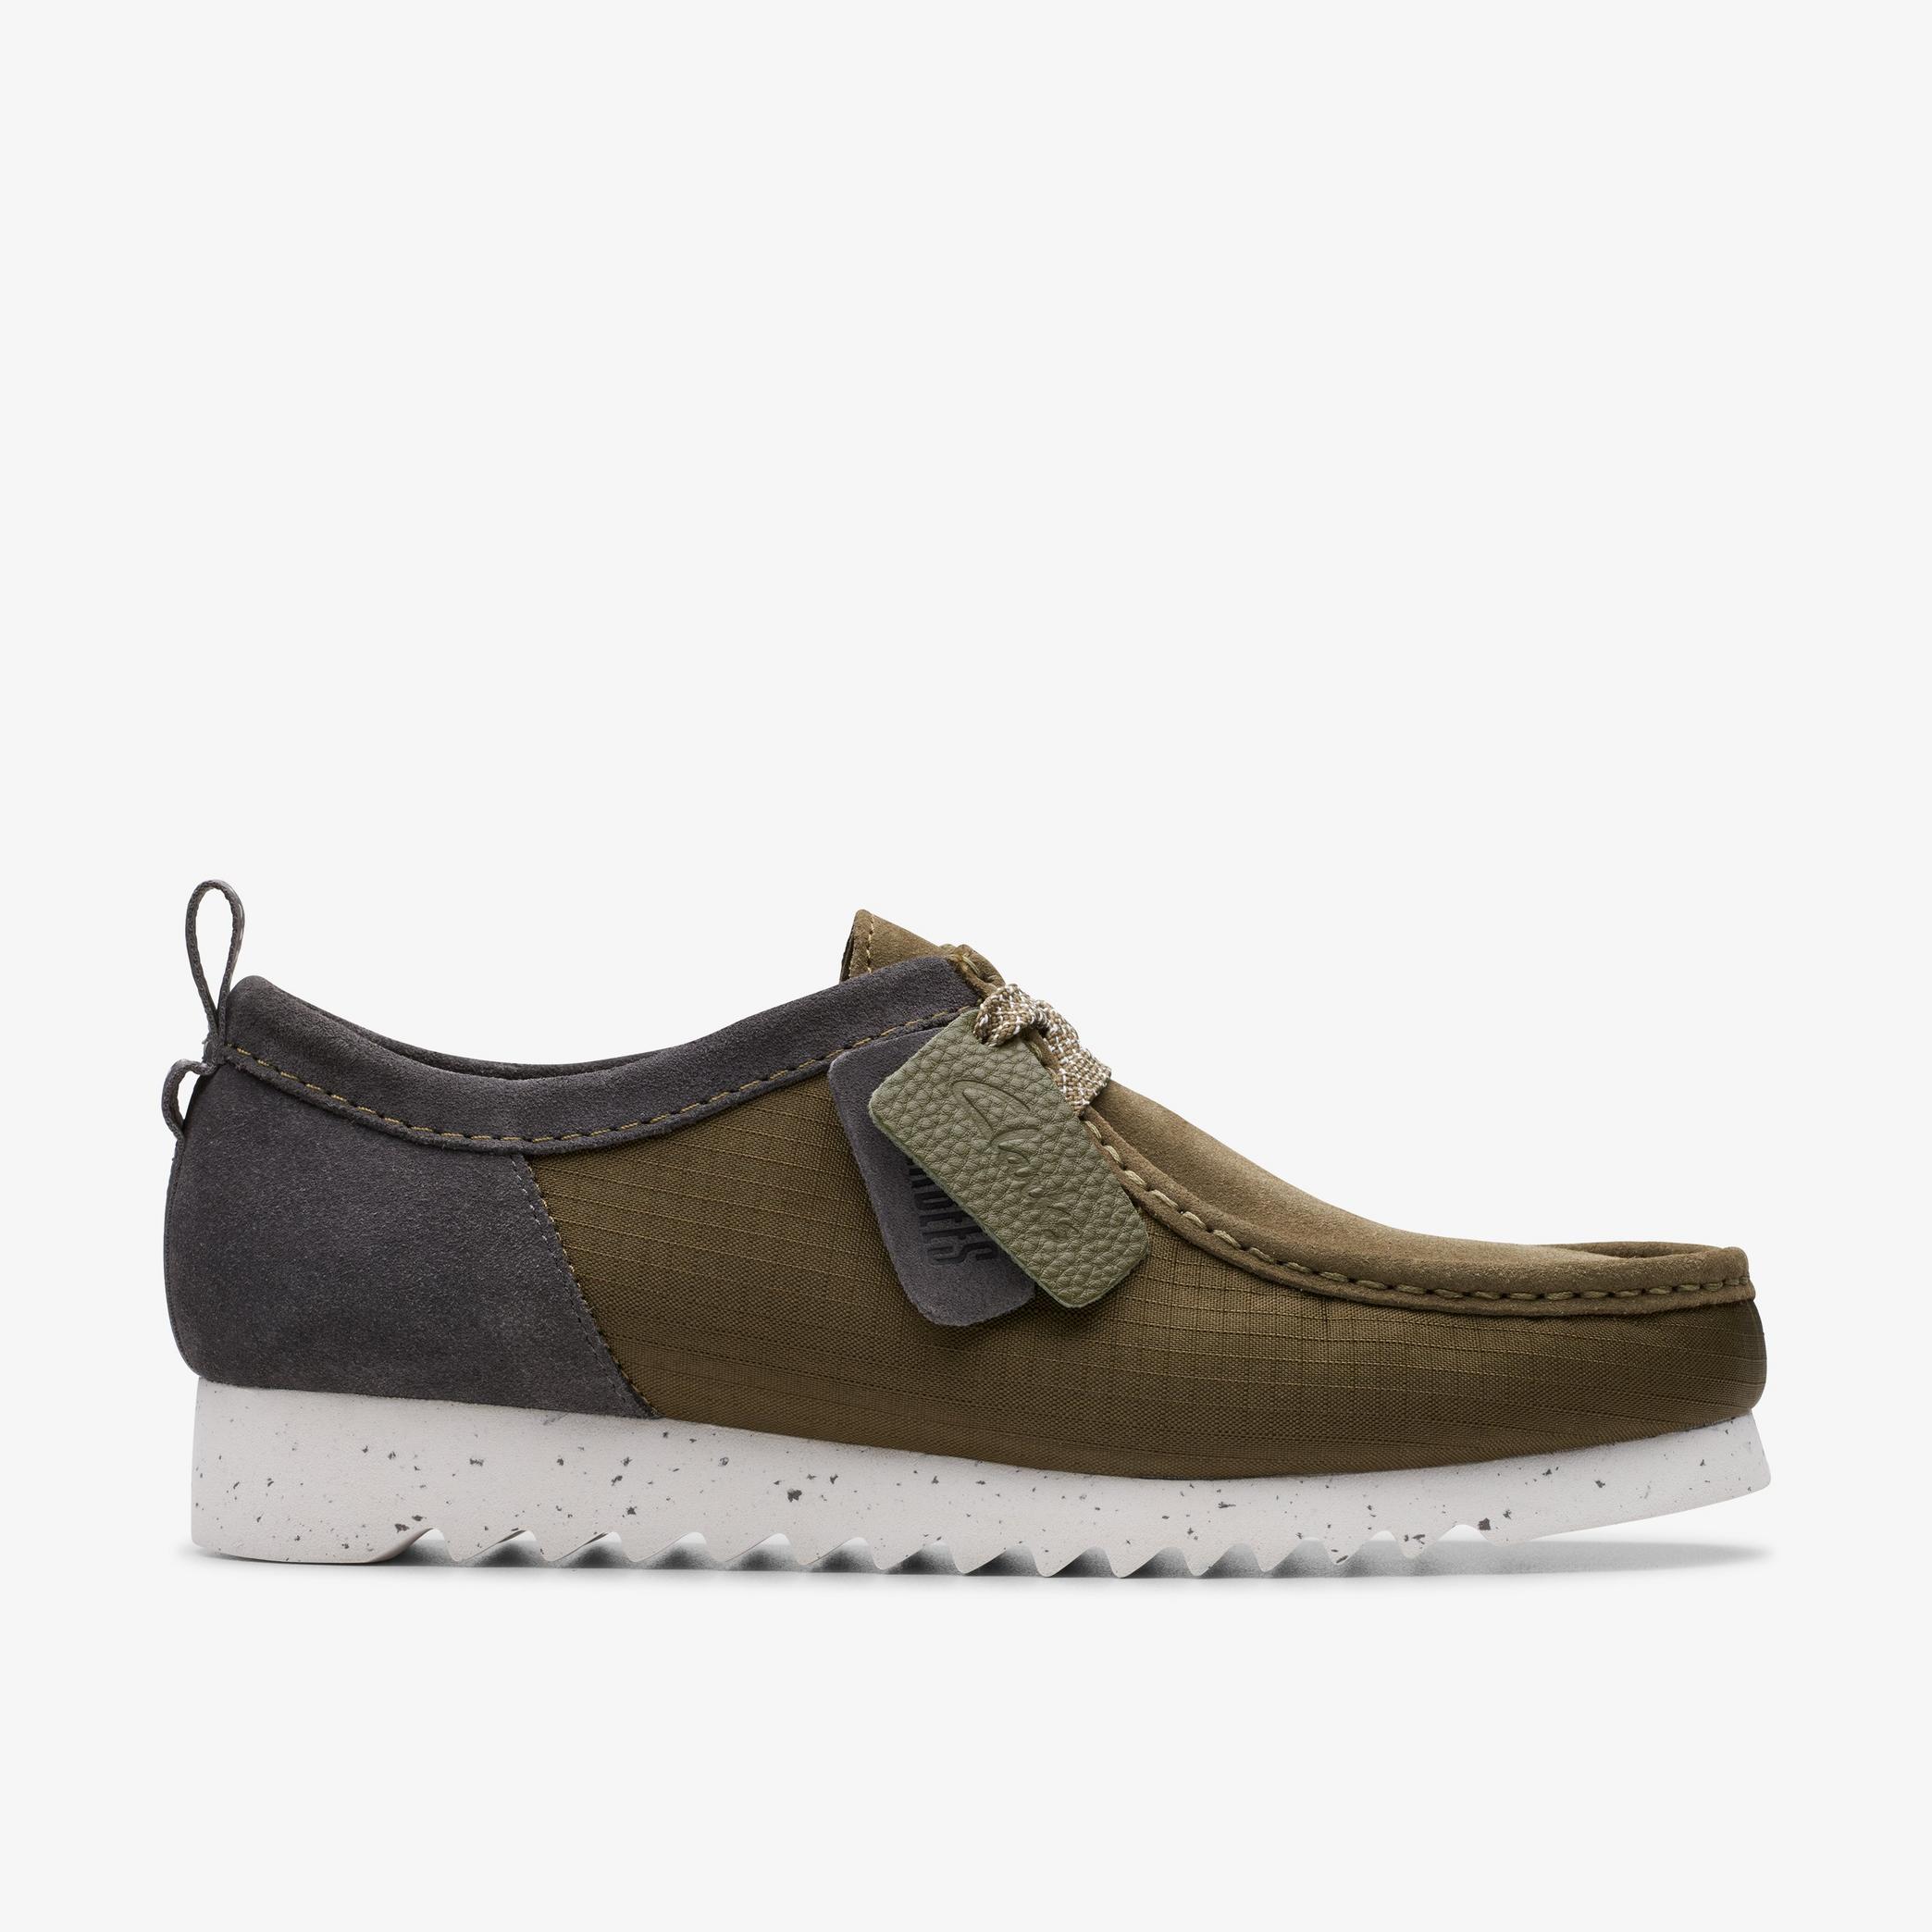 Wallabee FTRE Lo Olive Combination Moccasins, view 1 of 6